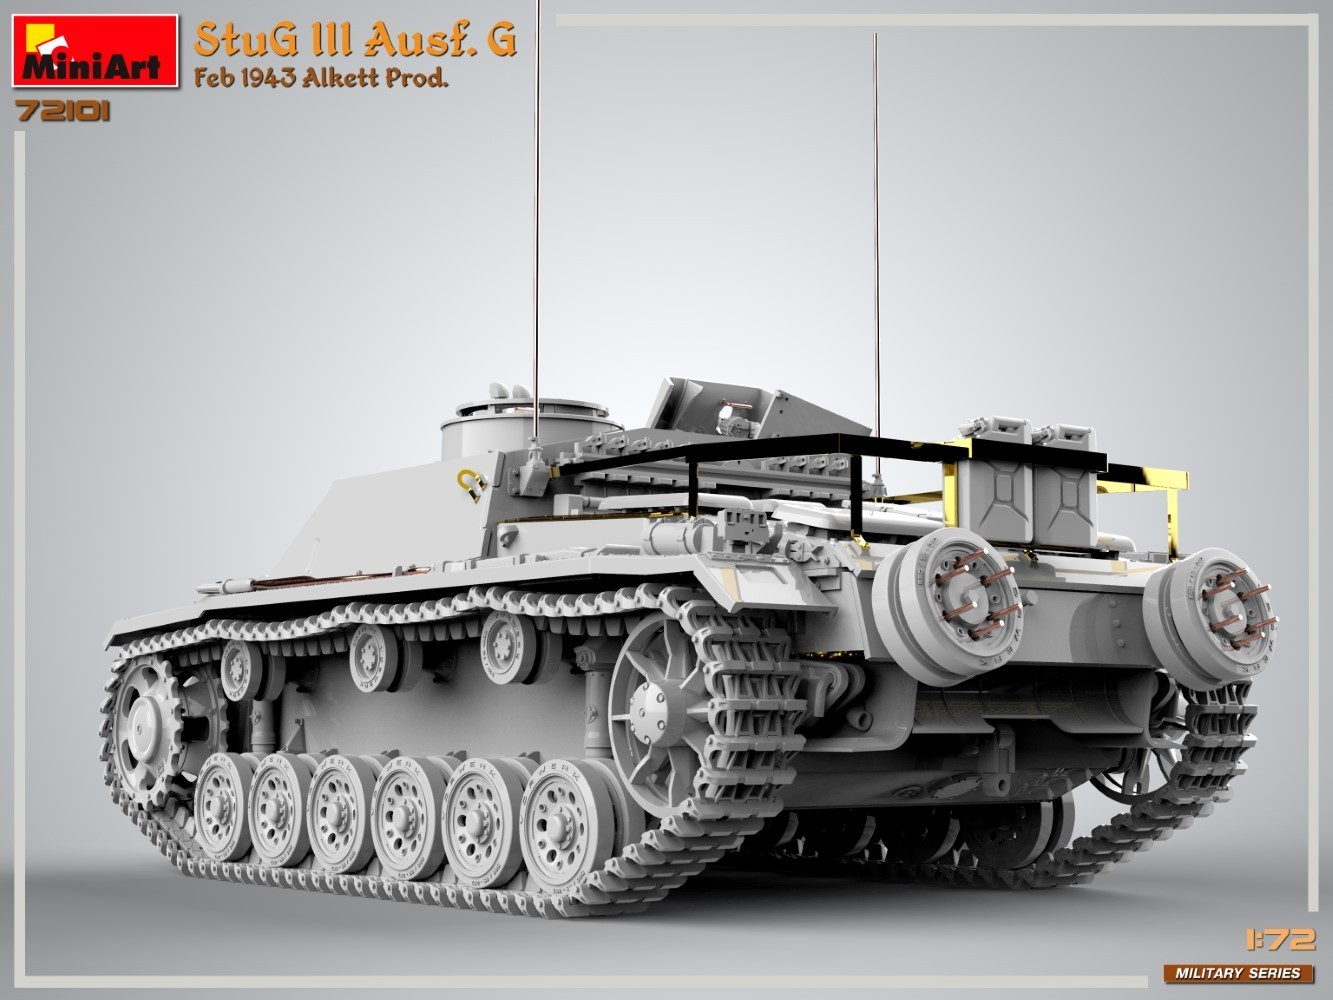 New Military Series Announced in 1/72 Scale, Starting with StuG III Ausf. G CAD-9